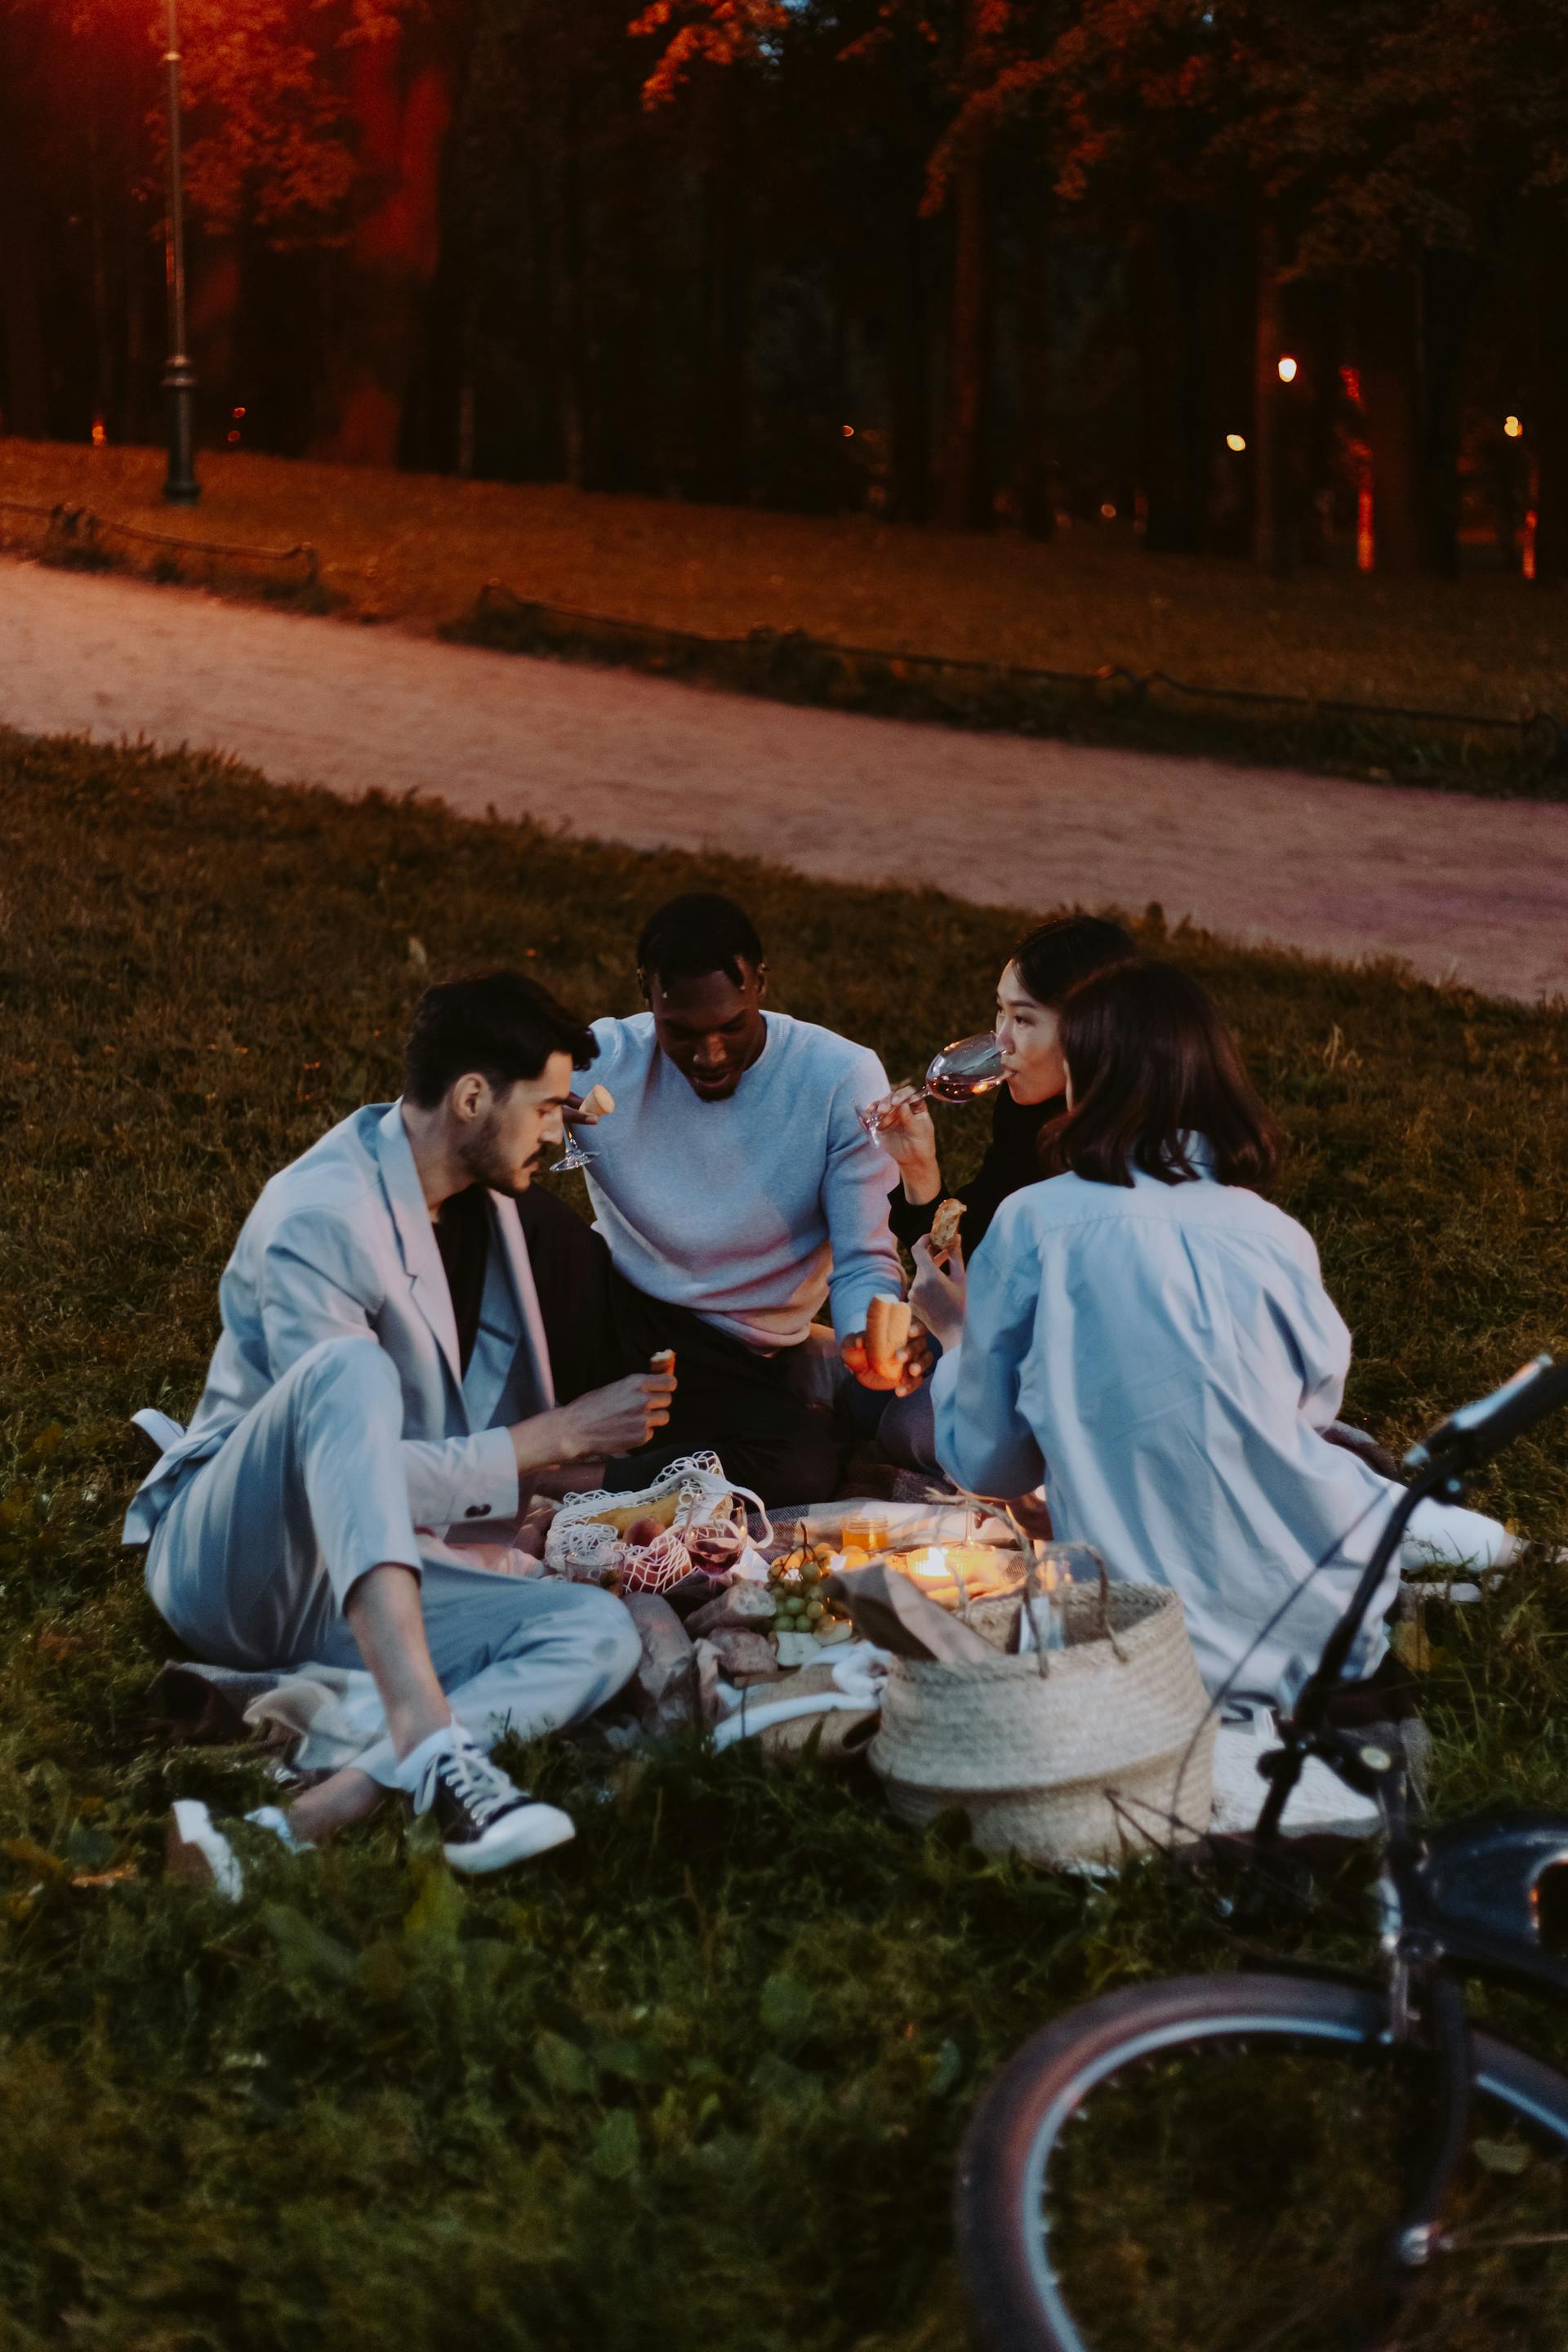 A group of friends having a picnic together | Source: Pexels